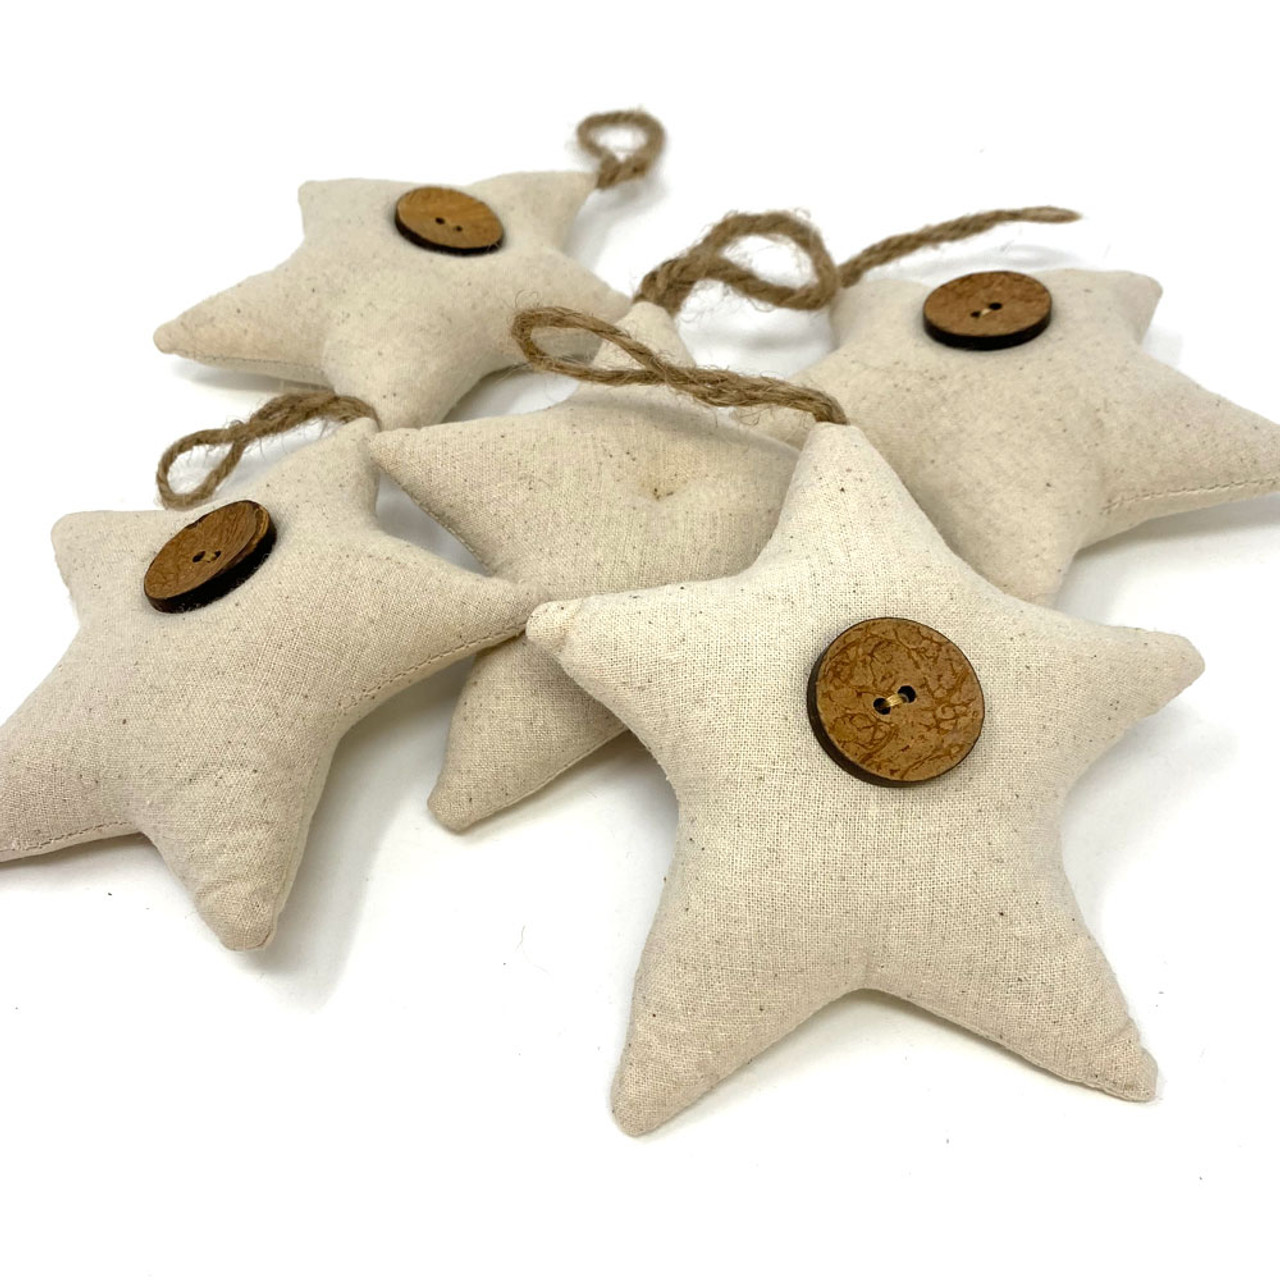 Natural White Fabric Rustic Star Christmas Ornaments - Set of 5